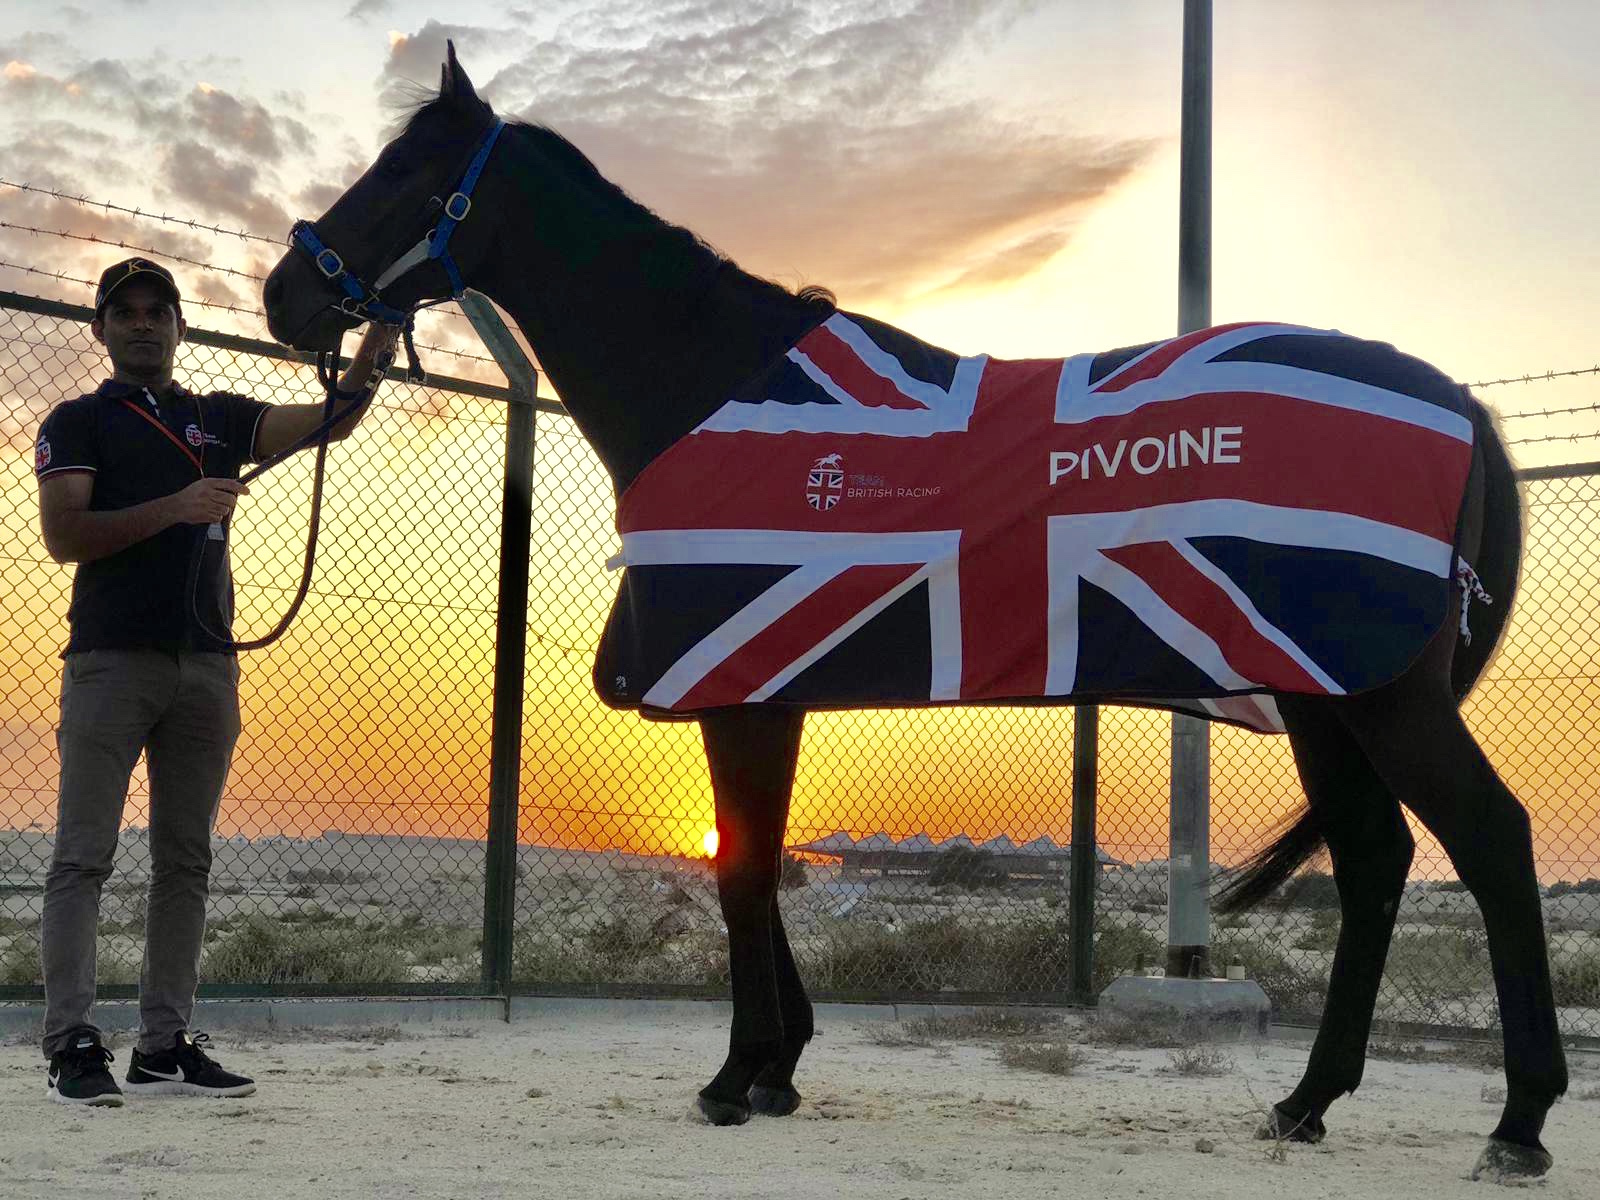 Primed for action: the Andrew Balding-trained Pivoine in Bahrain. The grandstand at Sakhir racecourse is in the background. Photo: Maddy O'Meara